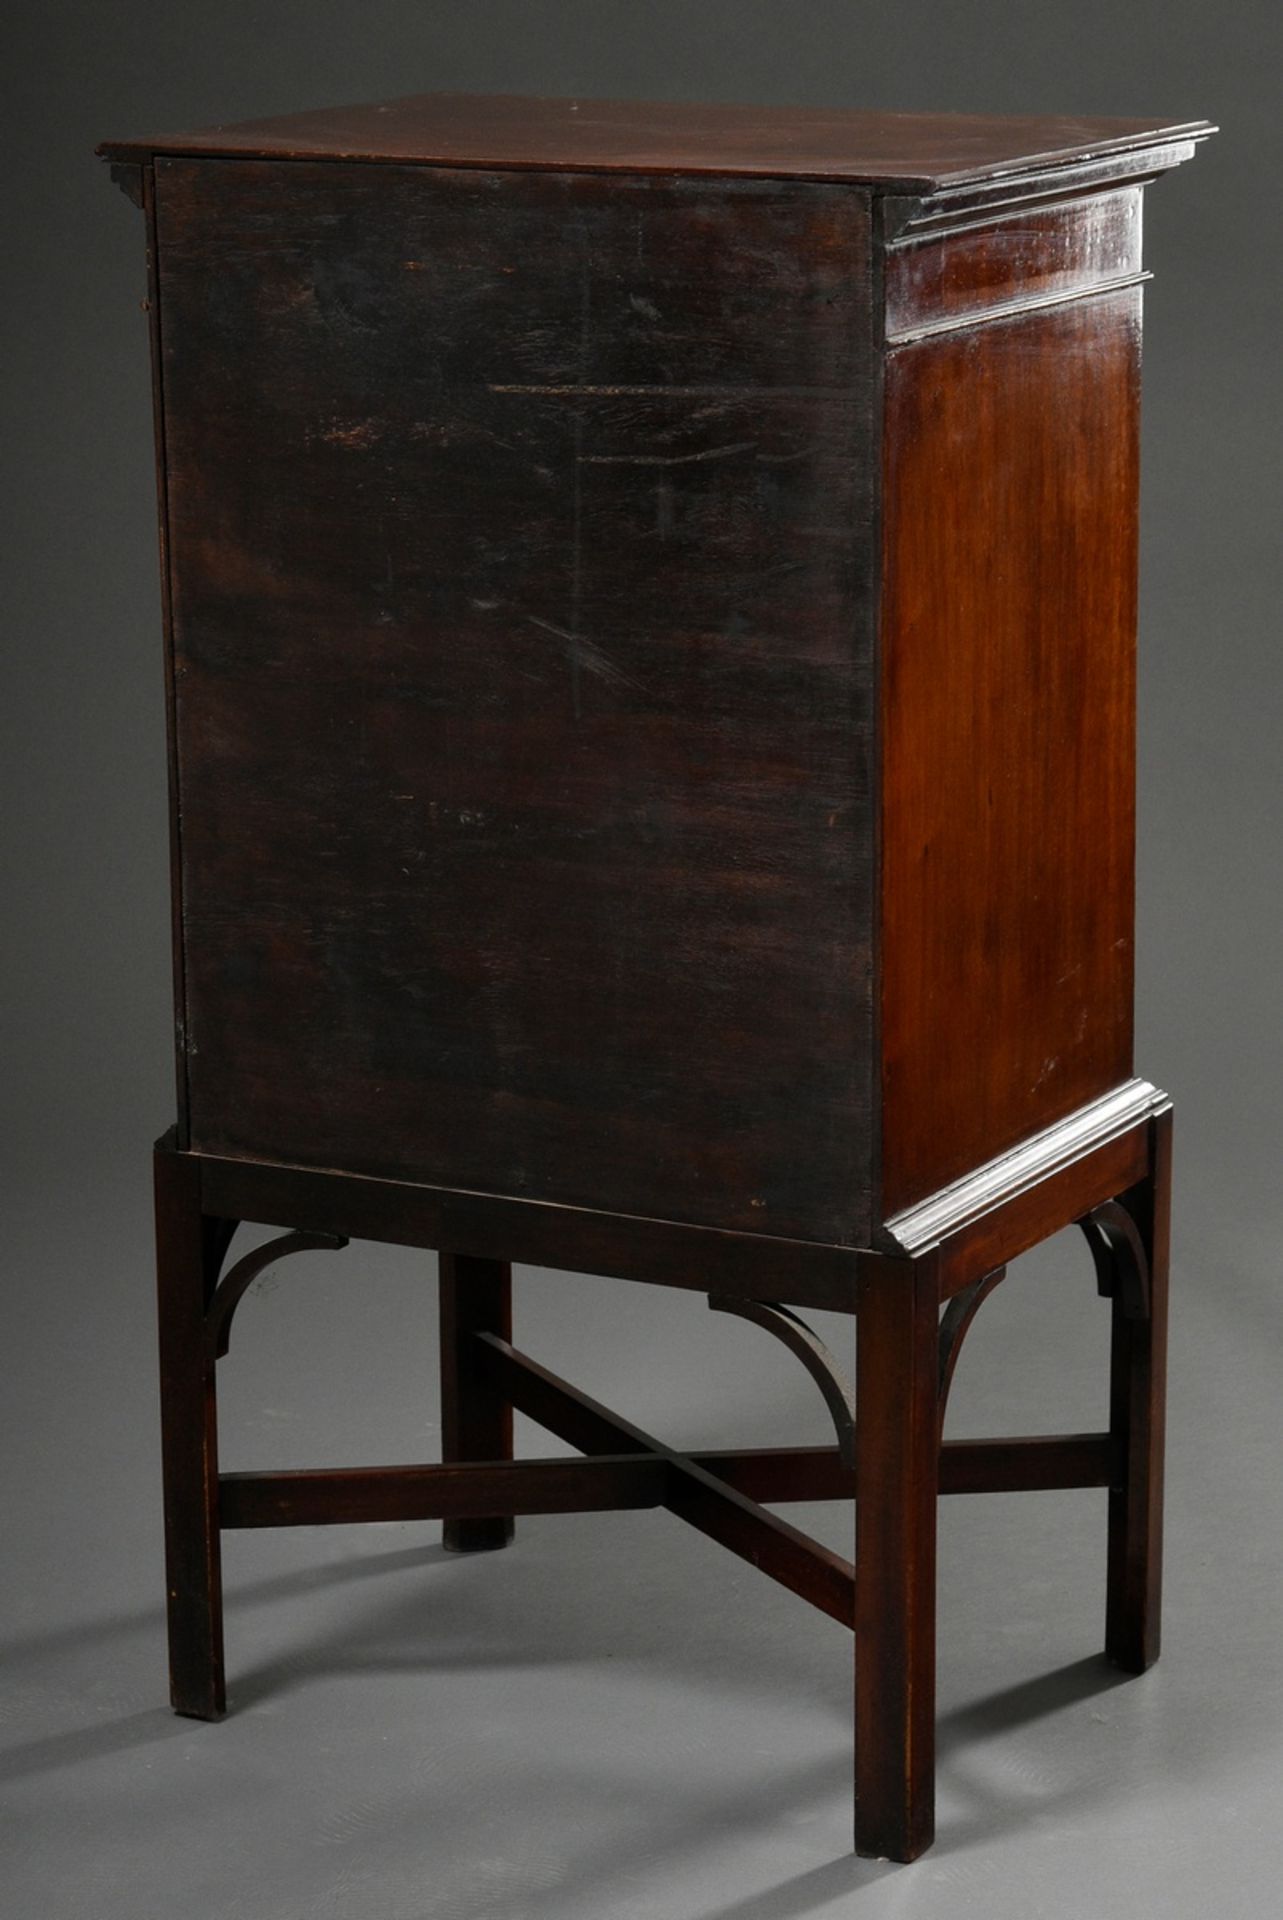 Tall mahogany music or file chest with 5 hinged drawers, England around 1900/1920, 95x52,5x38,5cm - Image 5 of 5